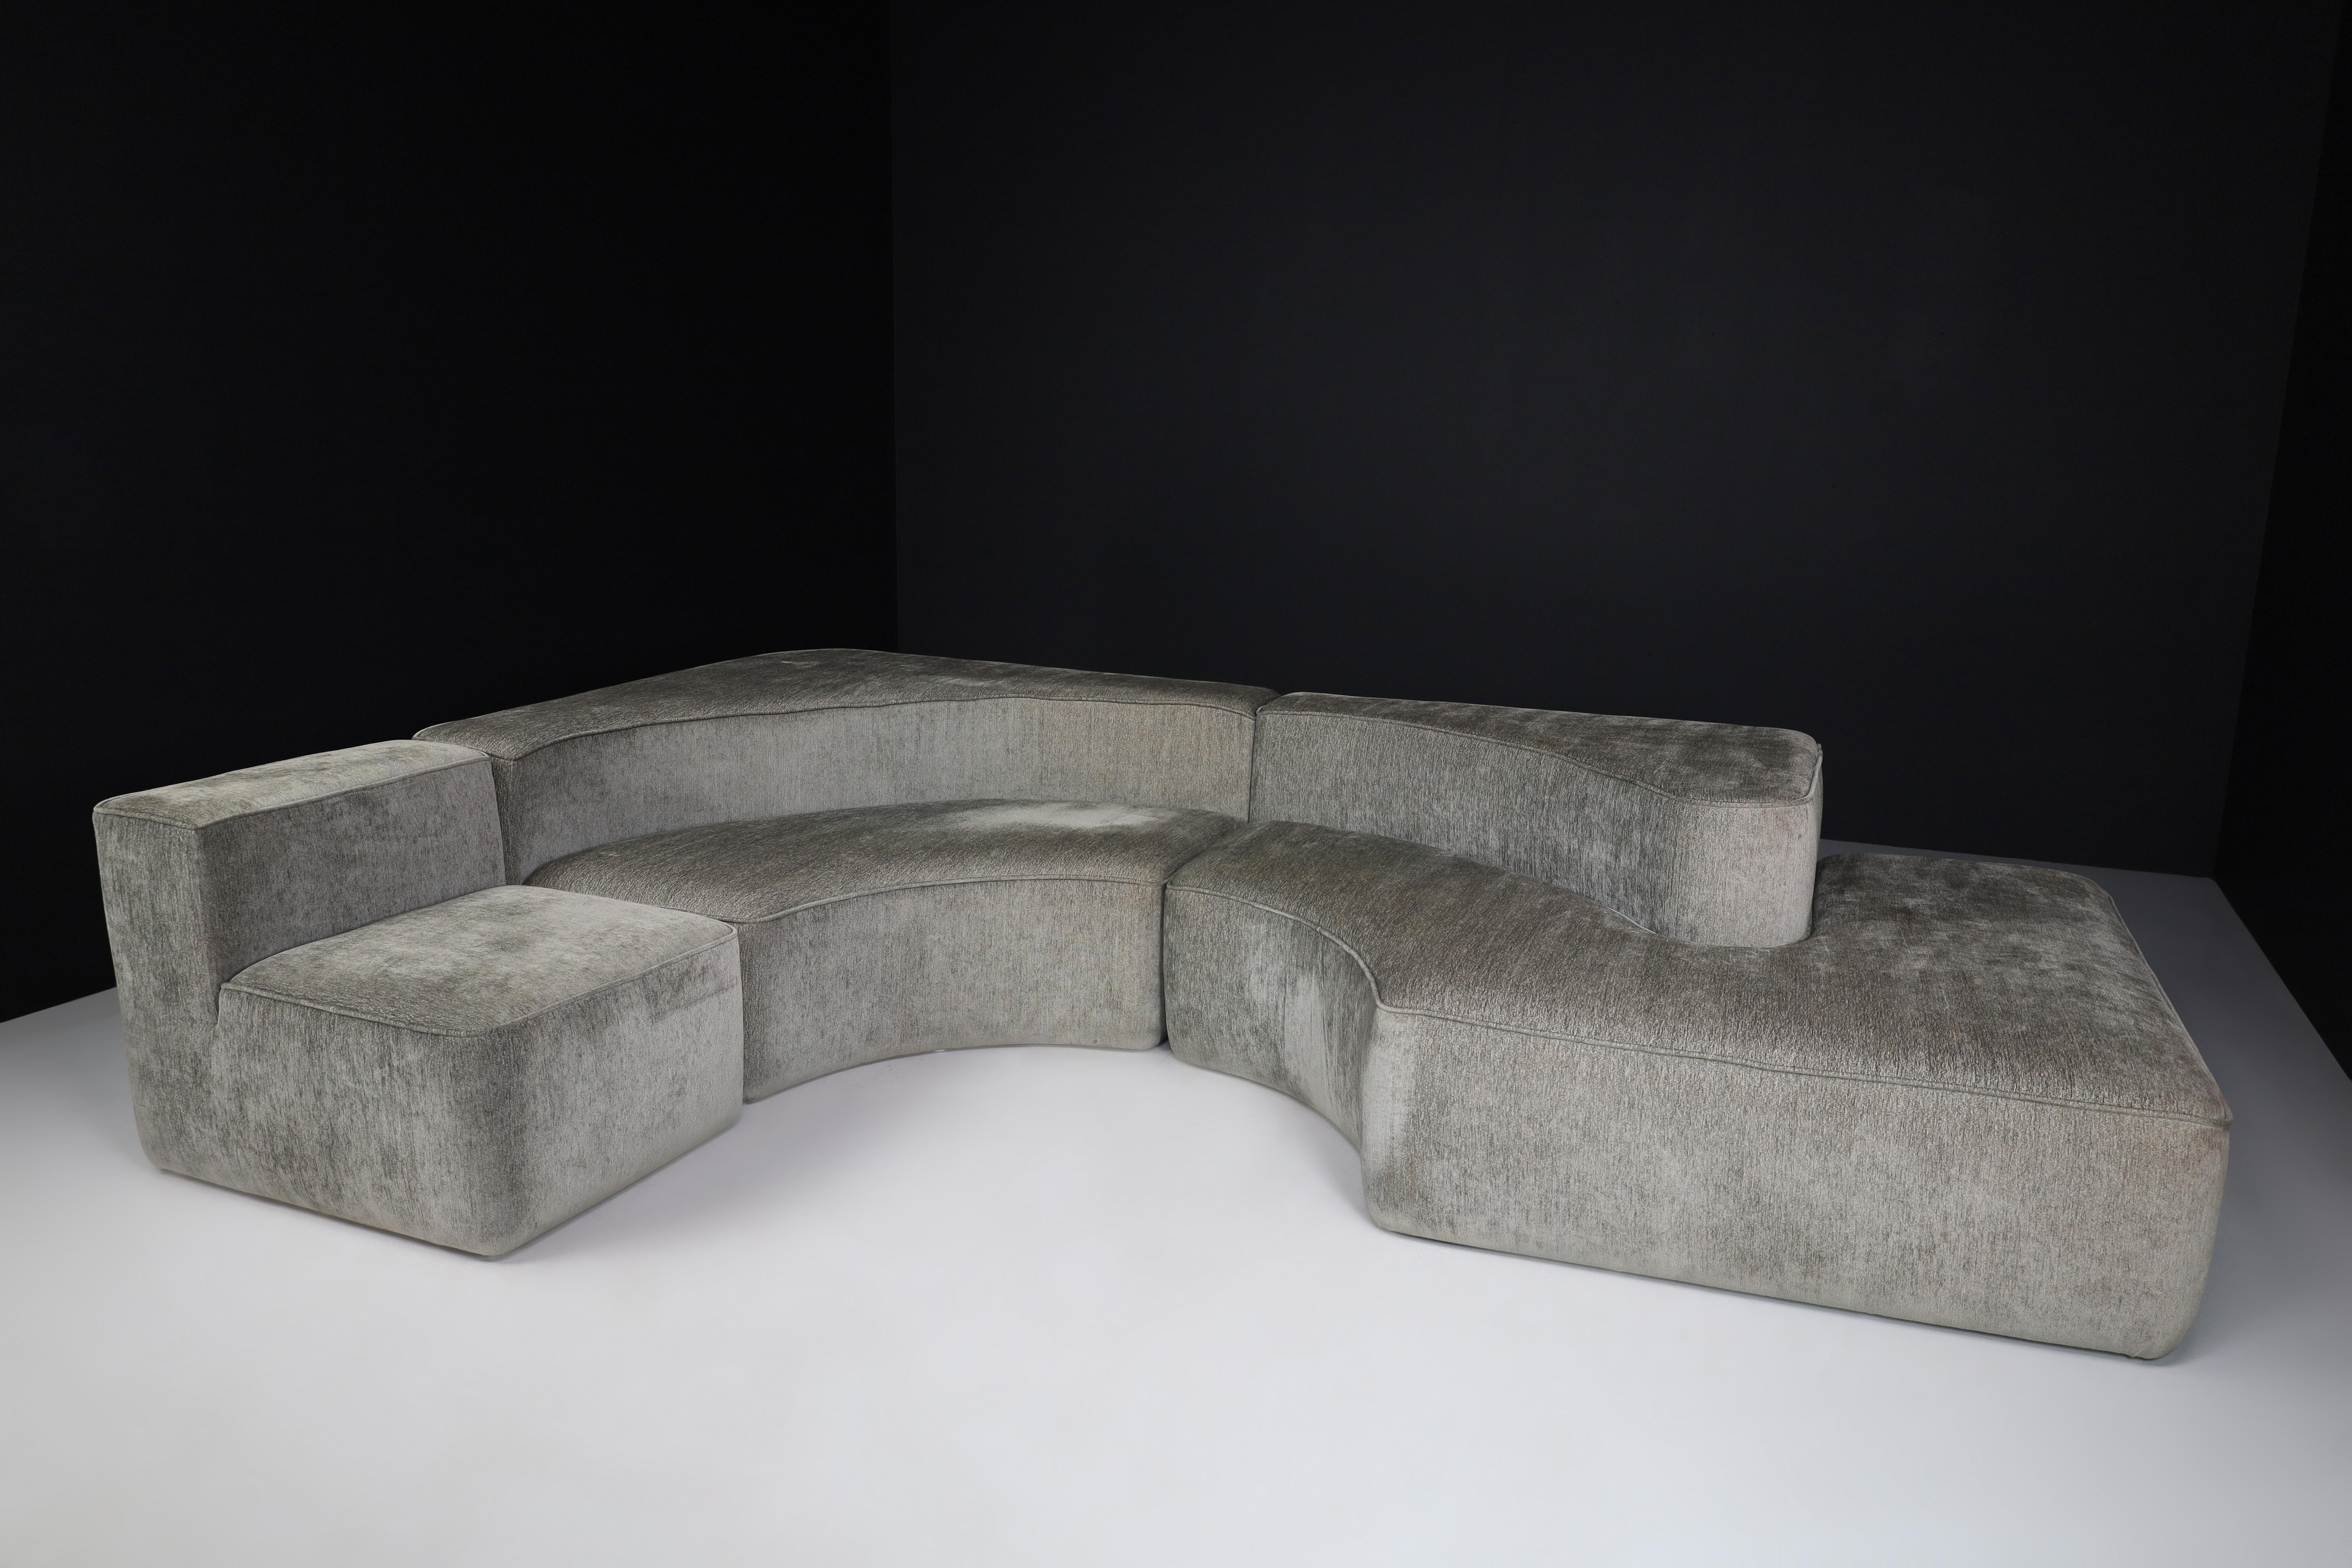 Italian modular sofa in the style of Pamio, Massari & Toso for Stillwood, Italy, 1970s

Italian modular sofa in the style of Pamio, Massari & Toso (Designers) for Stillwood (maker), who were known for creating entirely new forms following